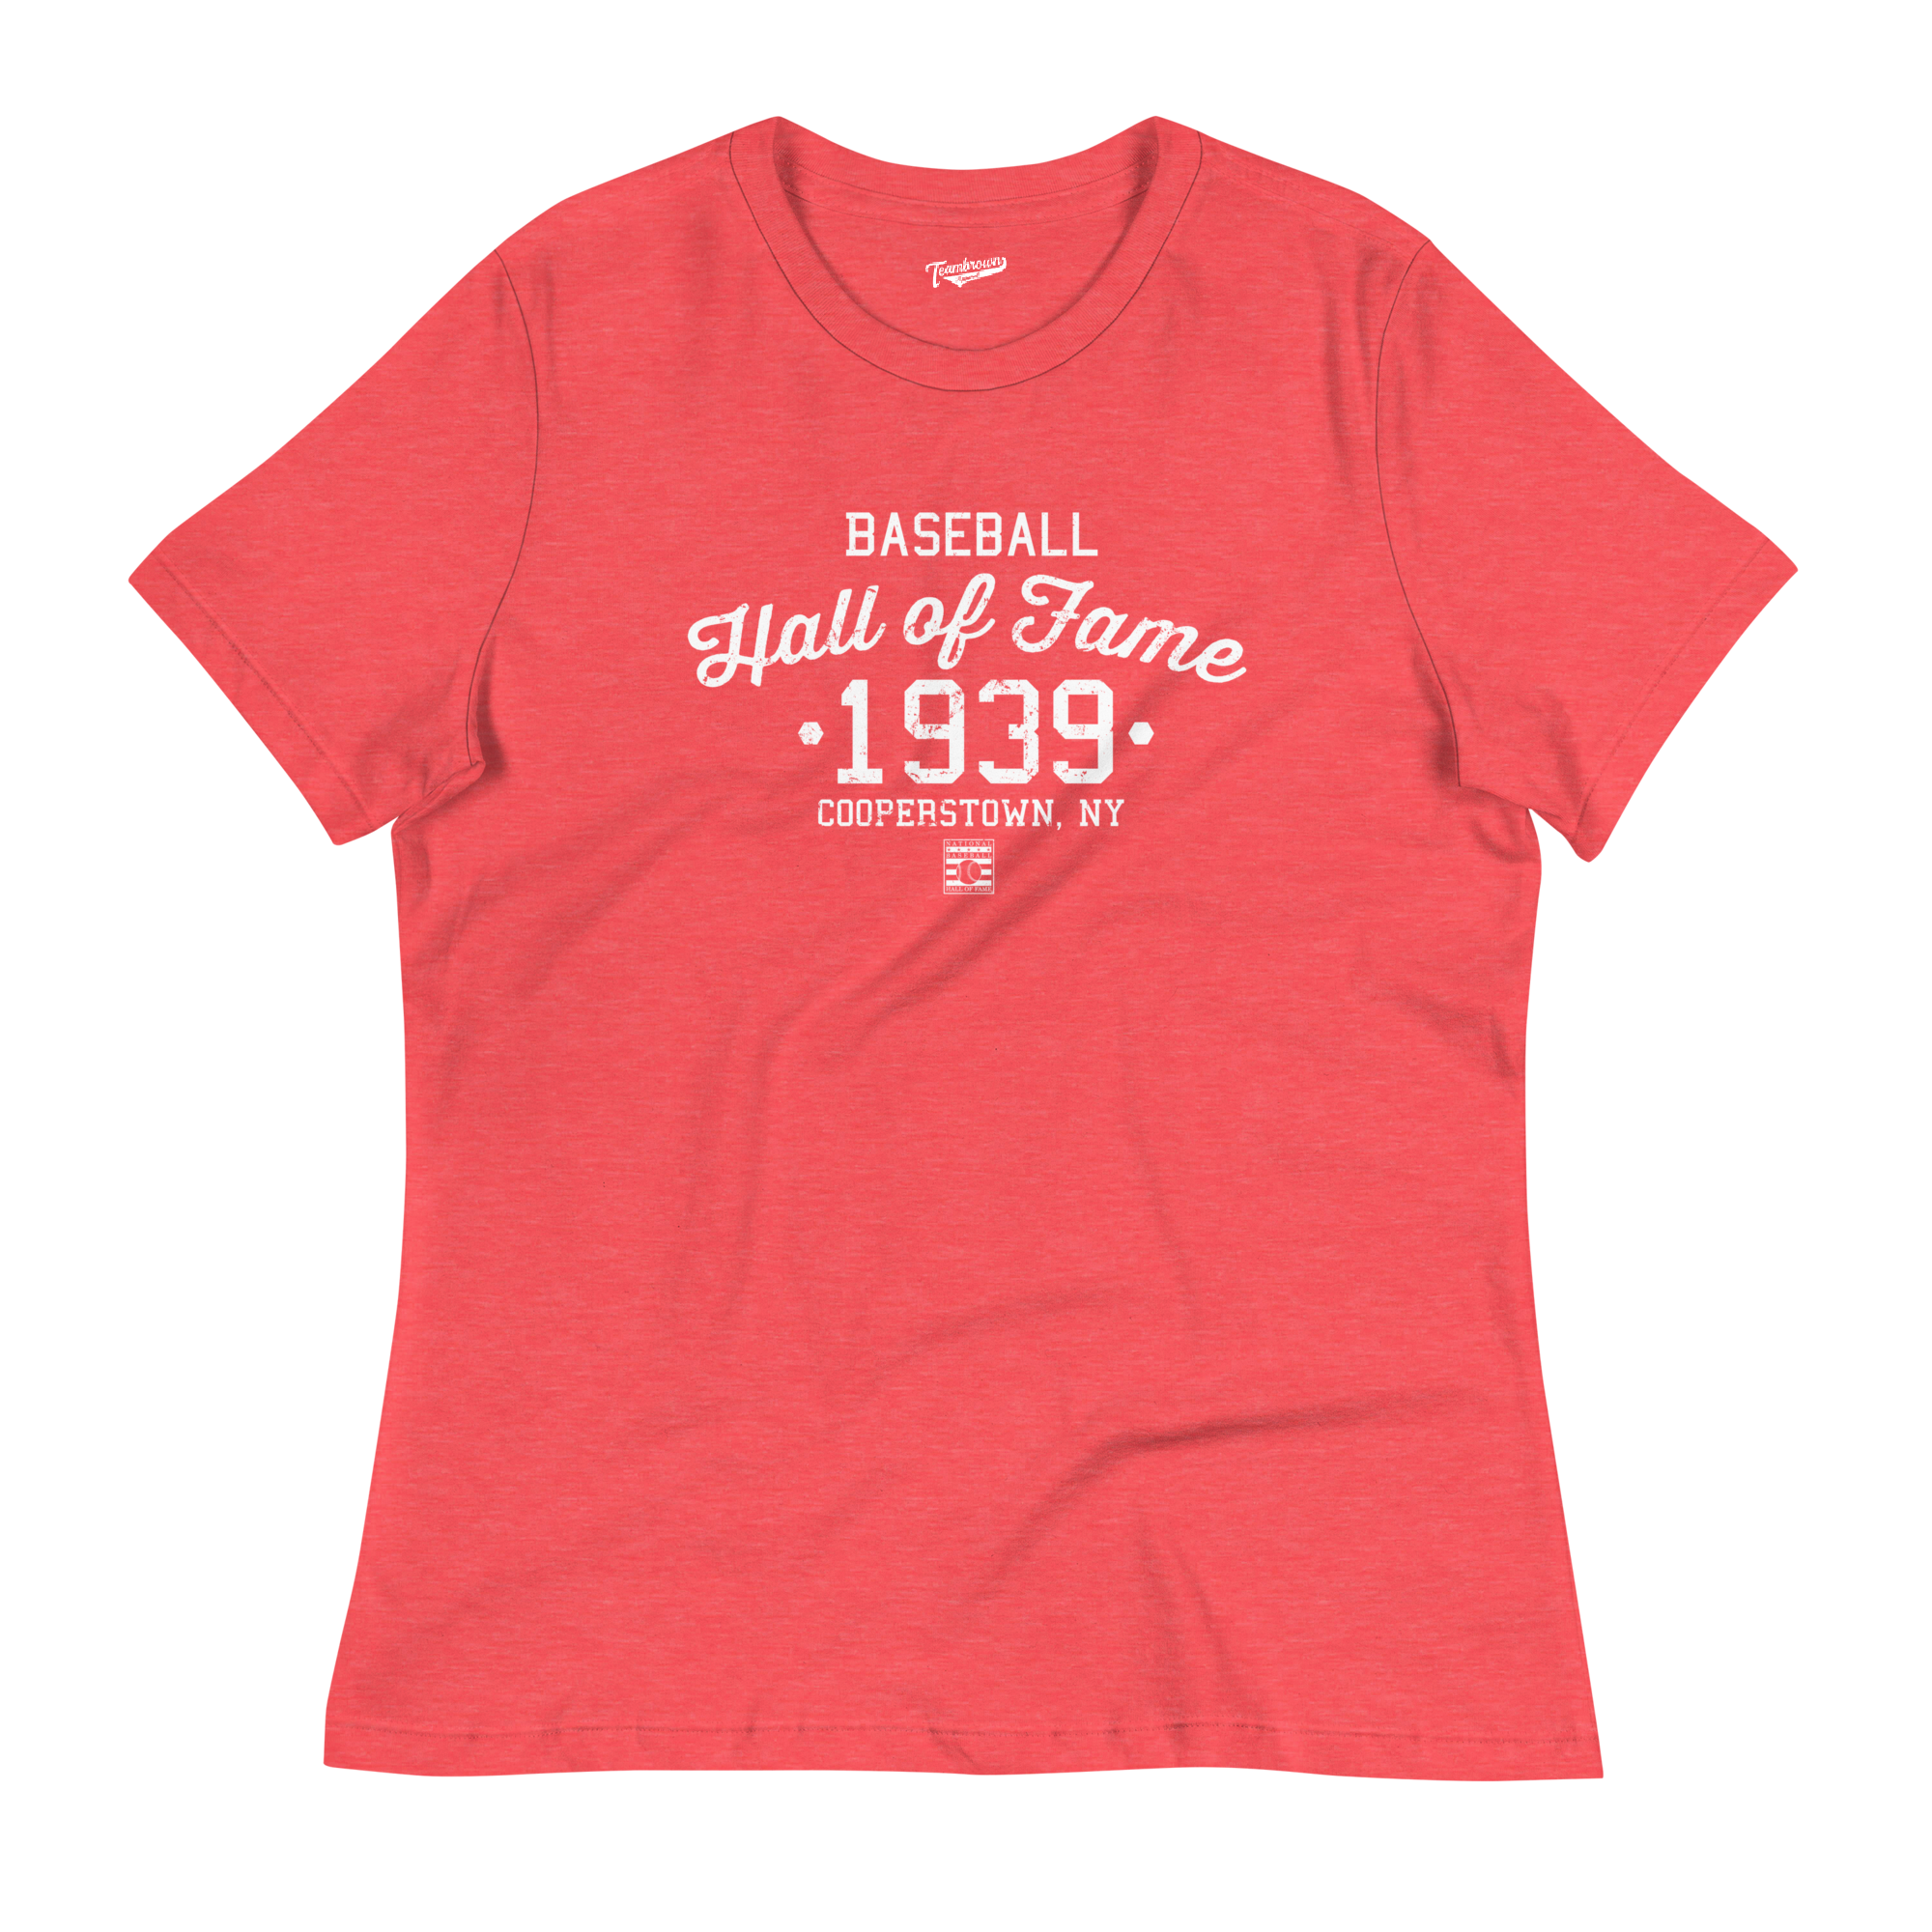 Baseball Hall of Fame - Est 1939 - Women's Relaxed Fit T-Shirt